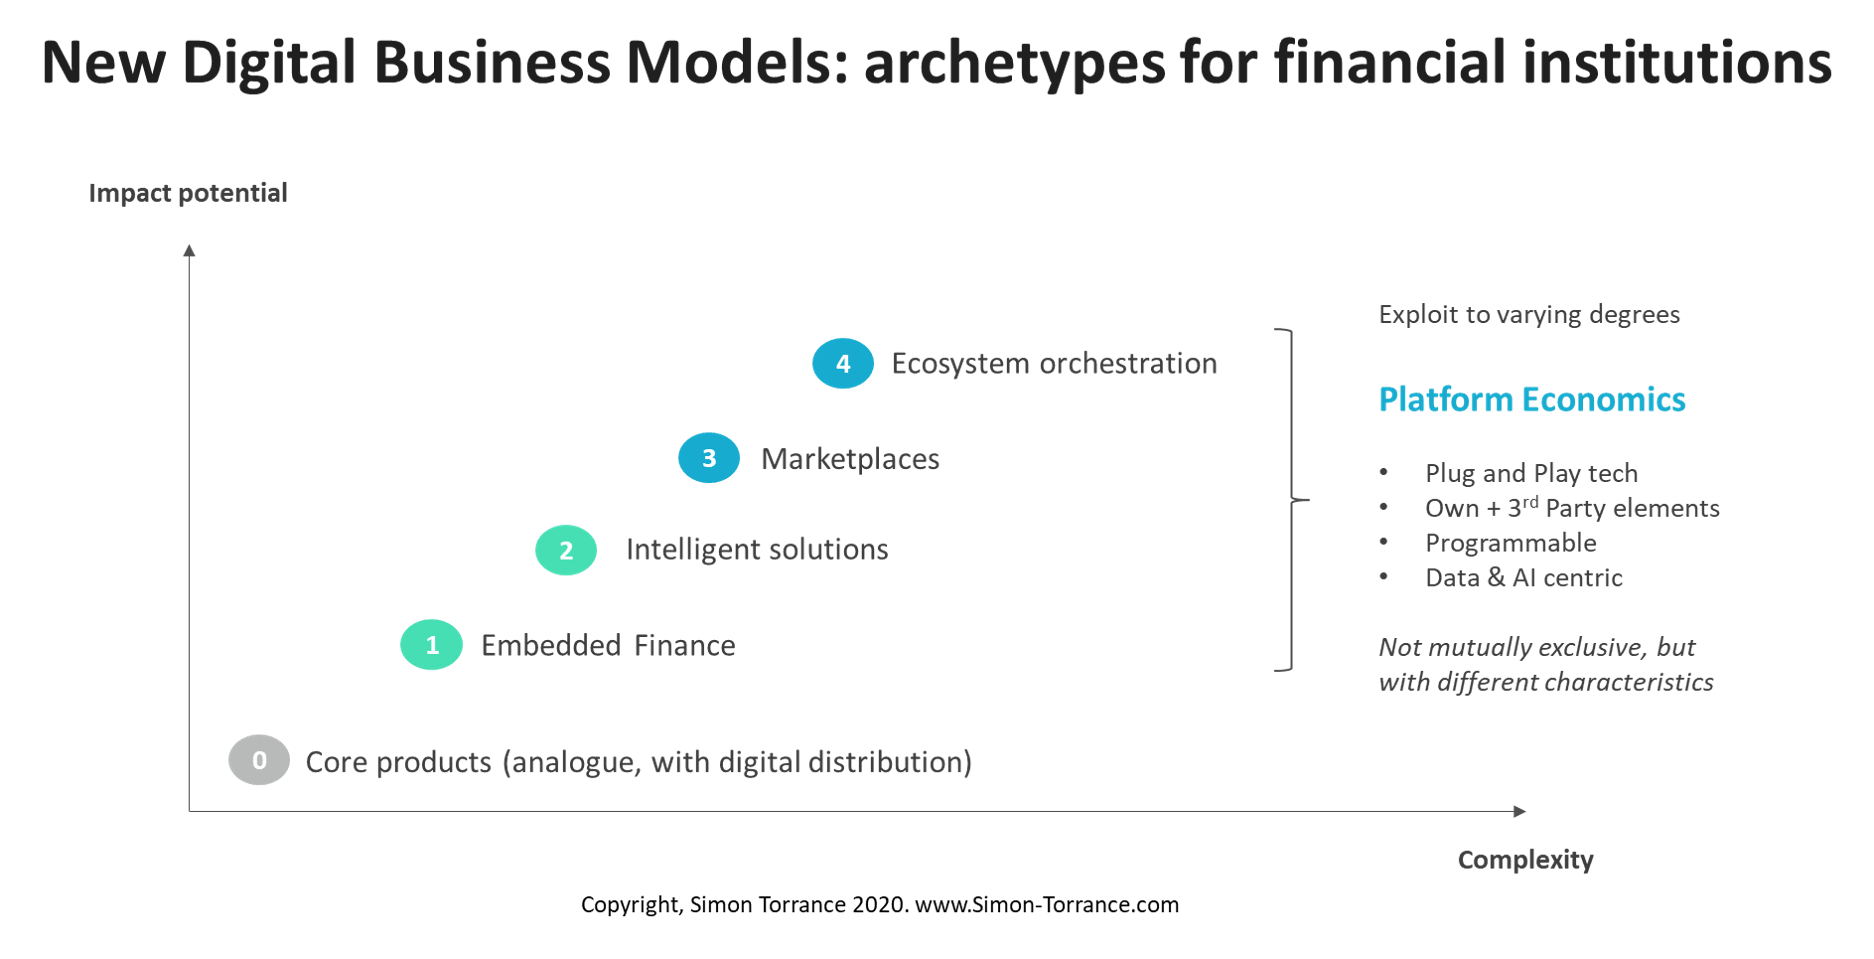 New digital business models for financial institutions.